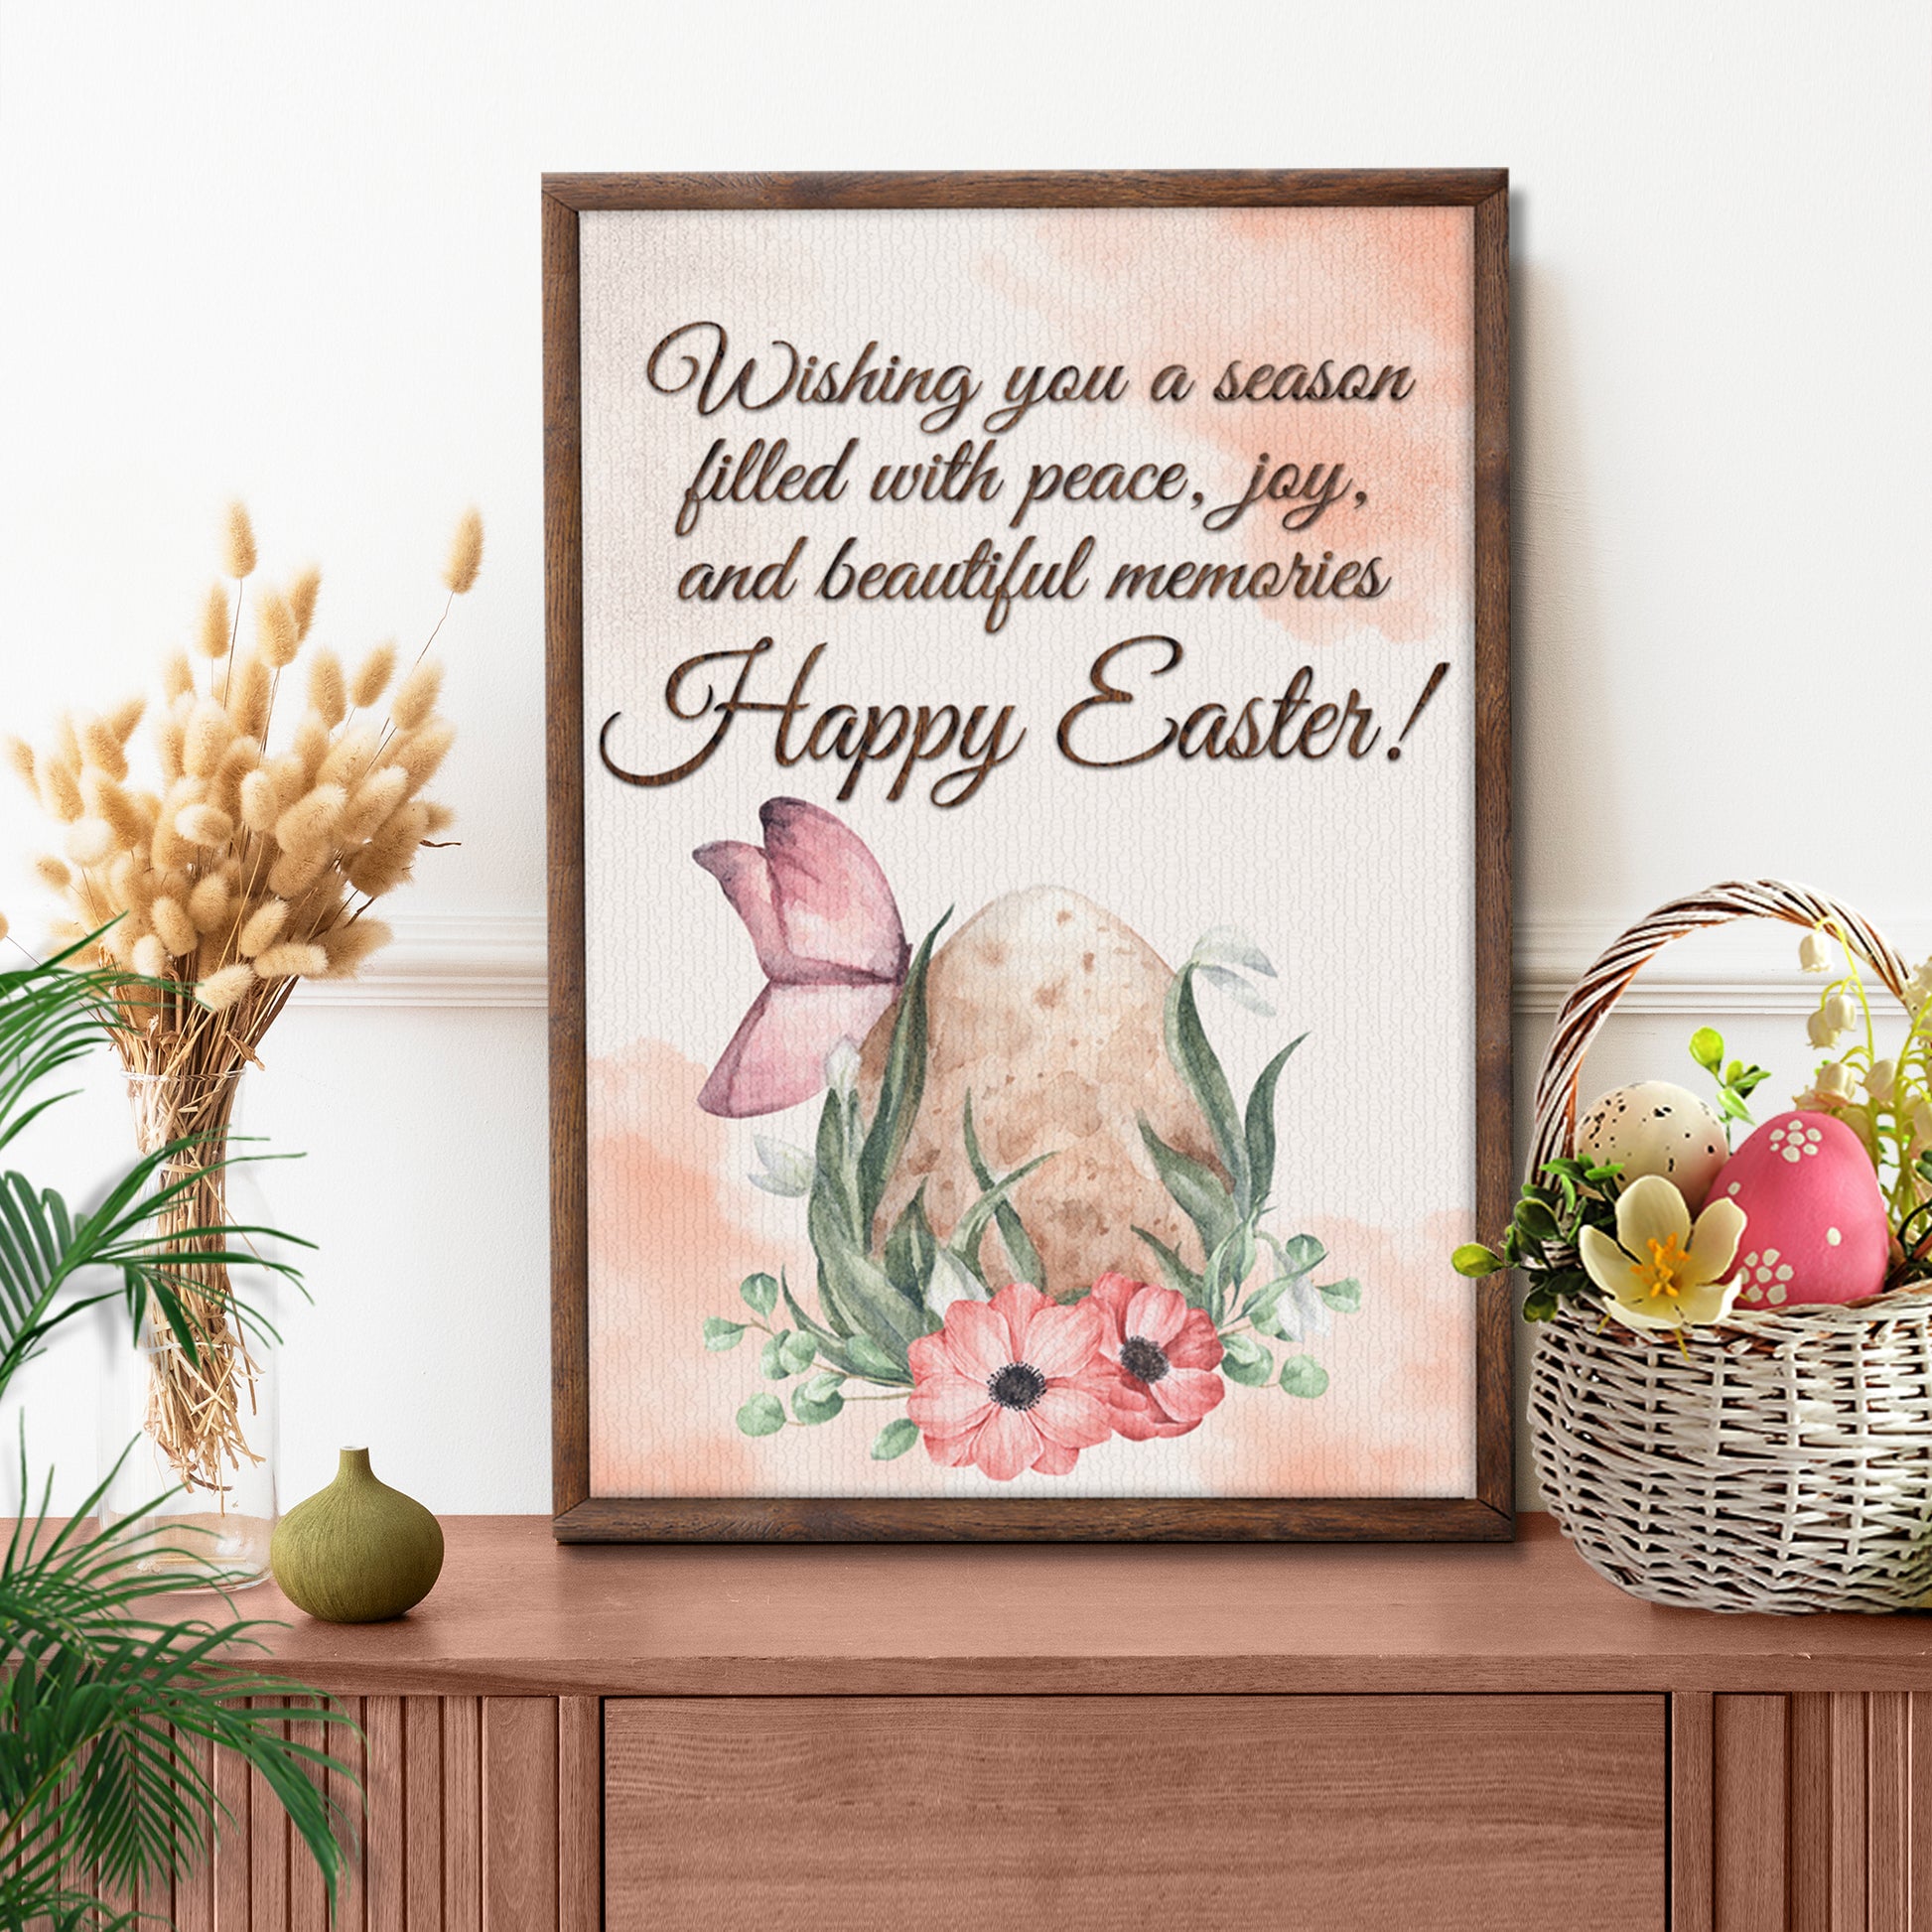 Easter Wishes Sign - Image by Tailored Canvases